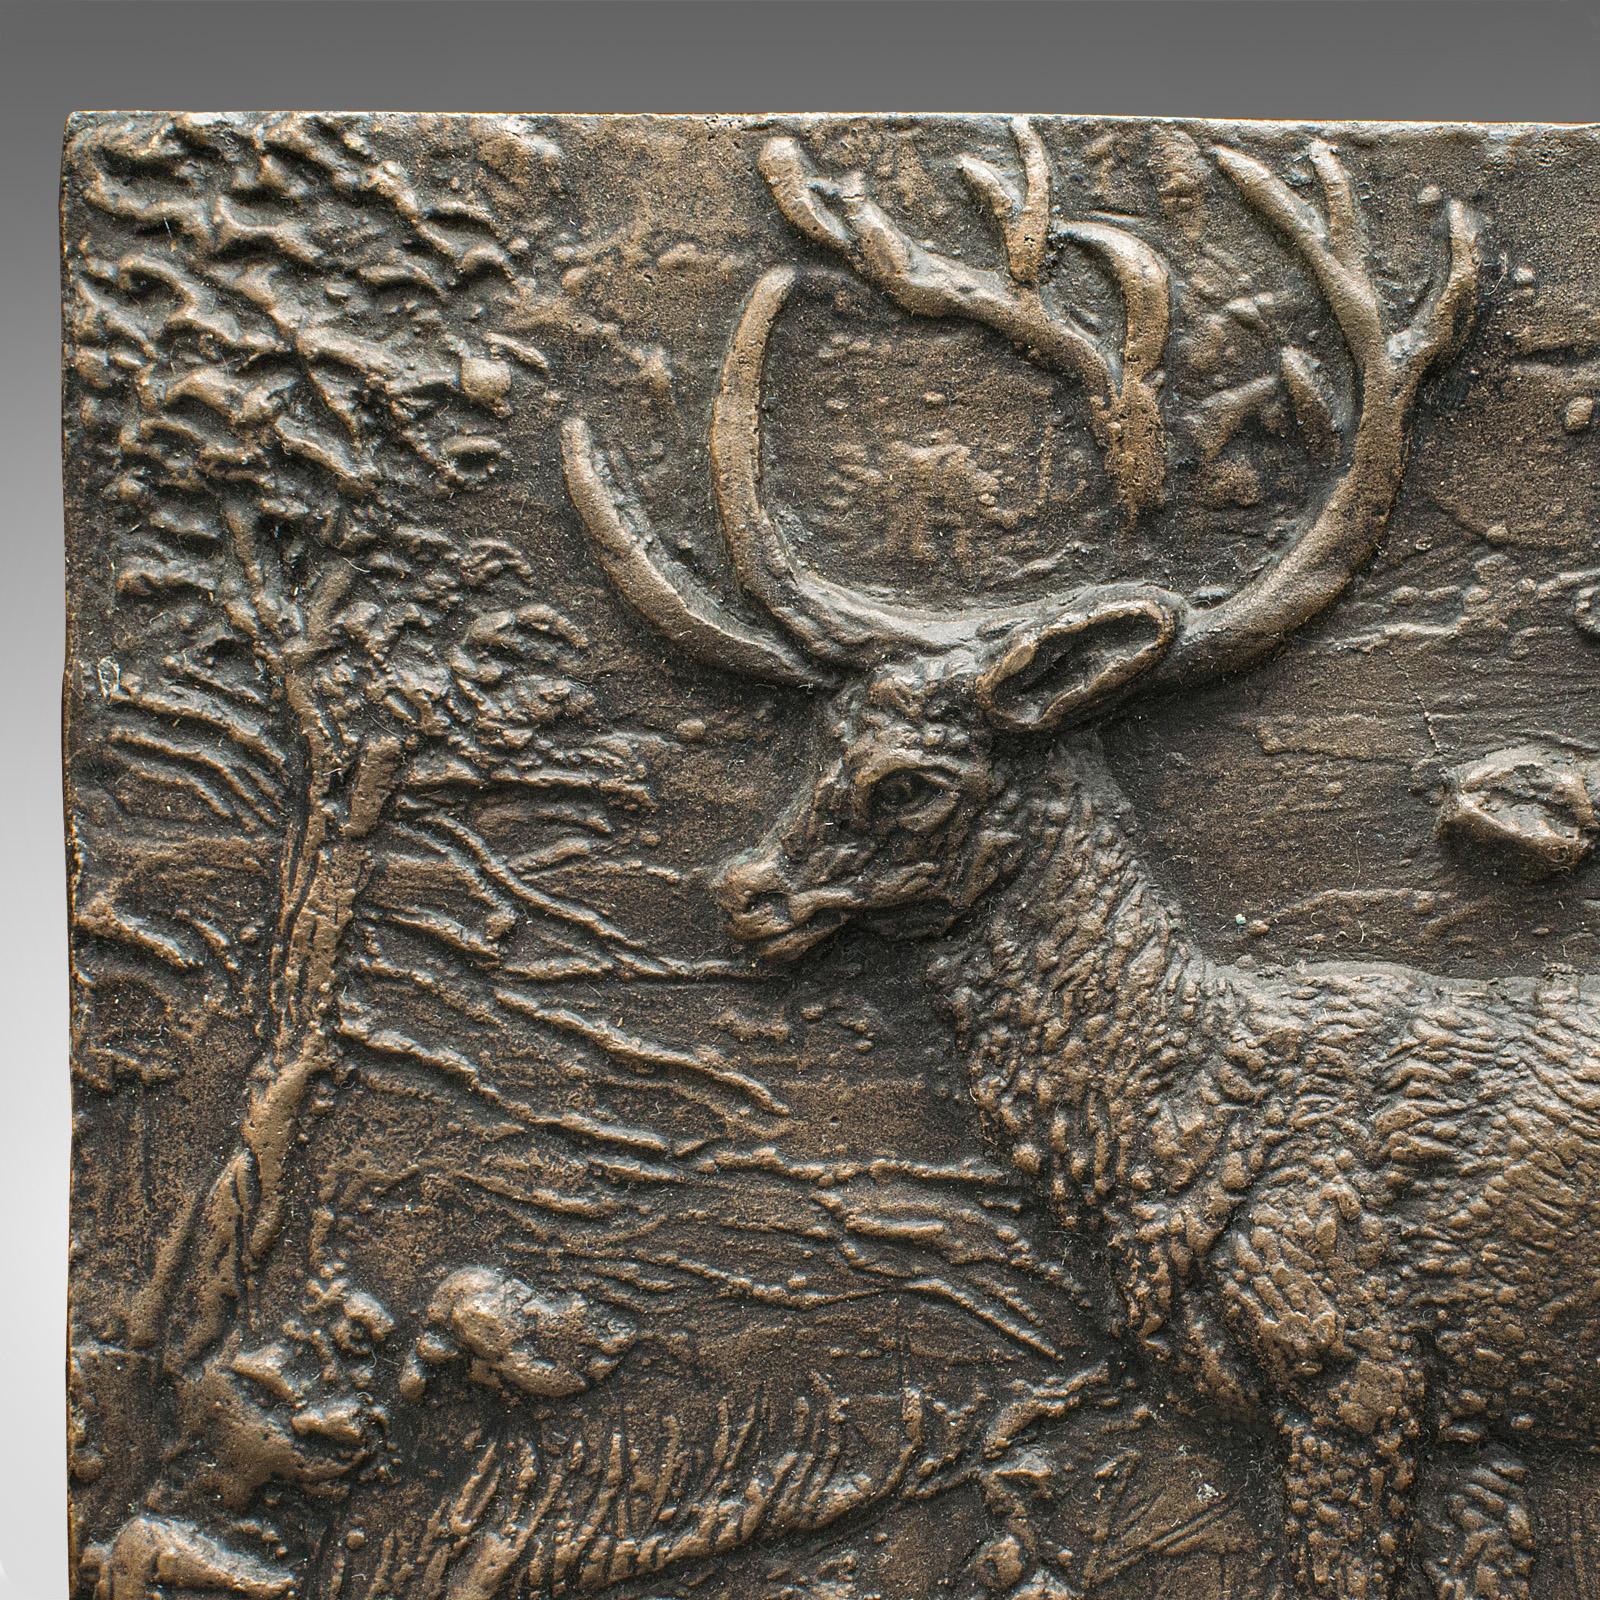 Vintage Stag Relief Plaque, English, Bronze, Decorative Plate, Country House In Good Condition For Sale In Hele, Devon, GB